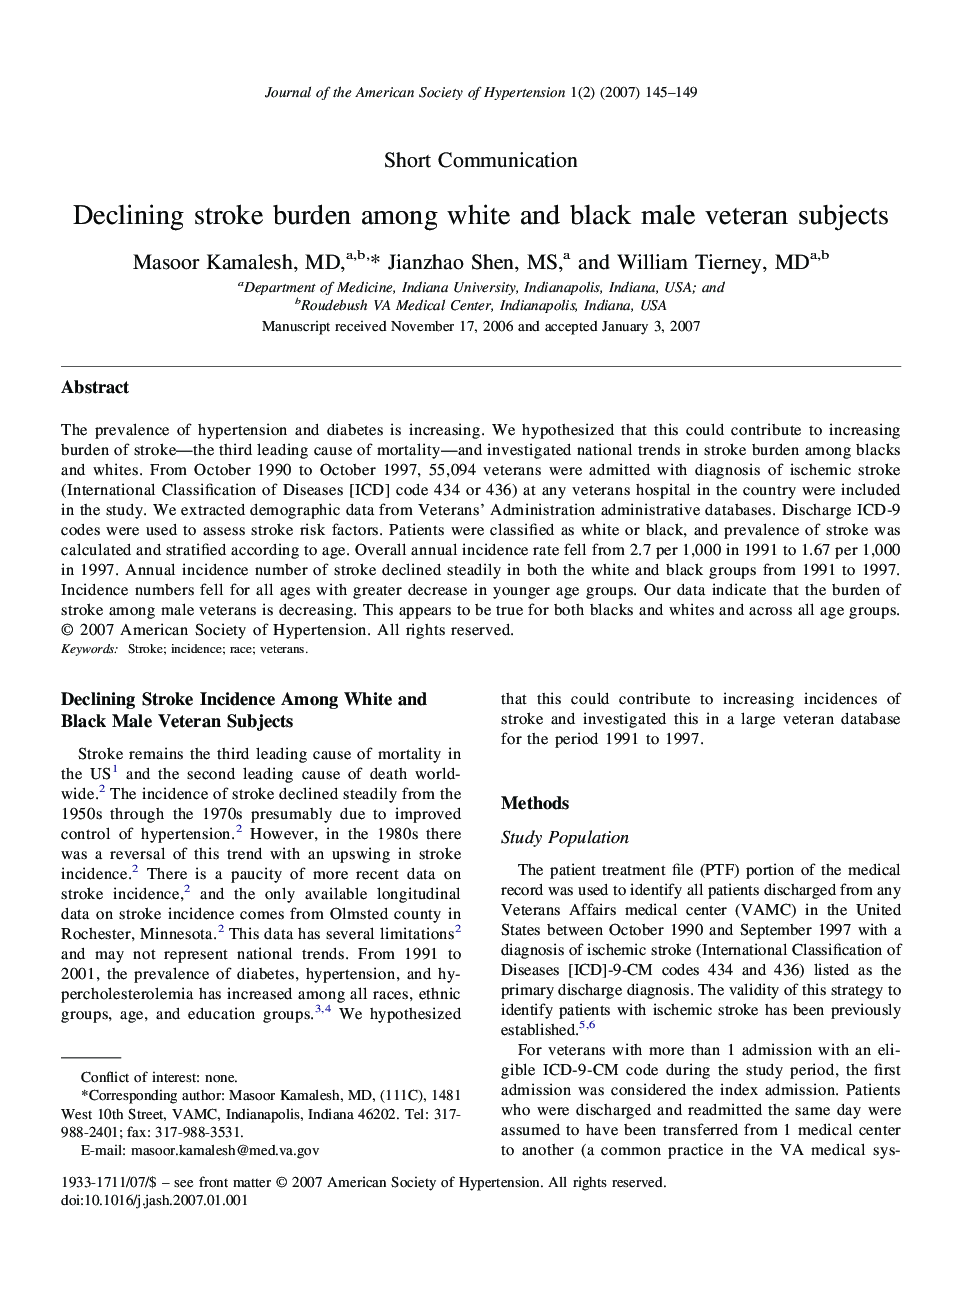 Declining stroke burden among white and black male veteran subjects 